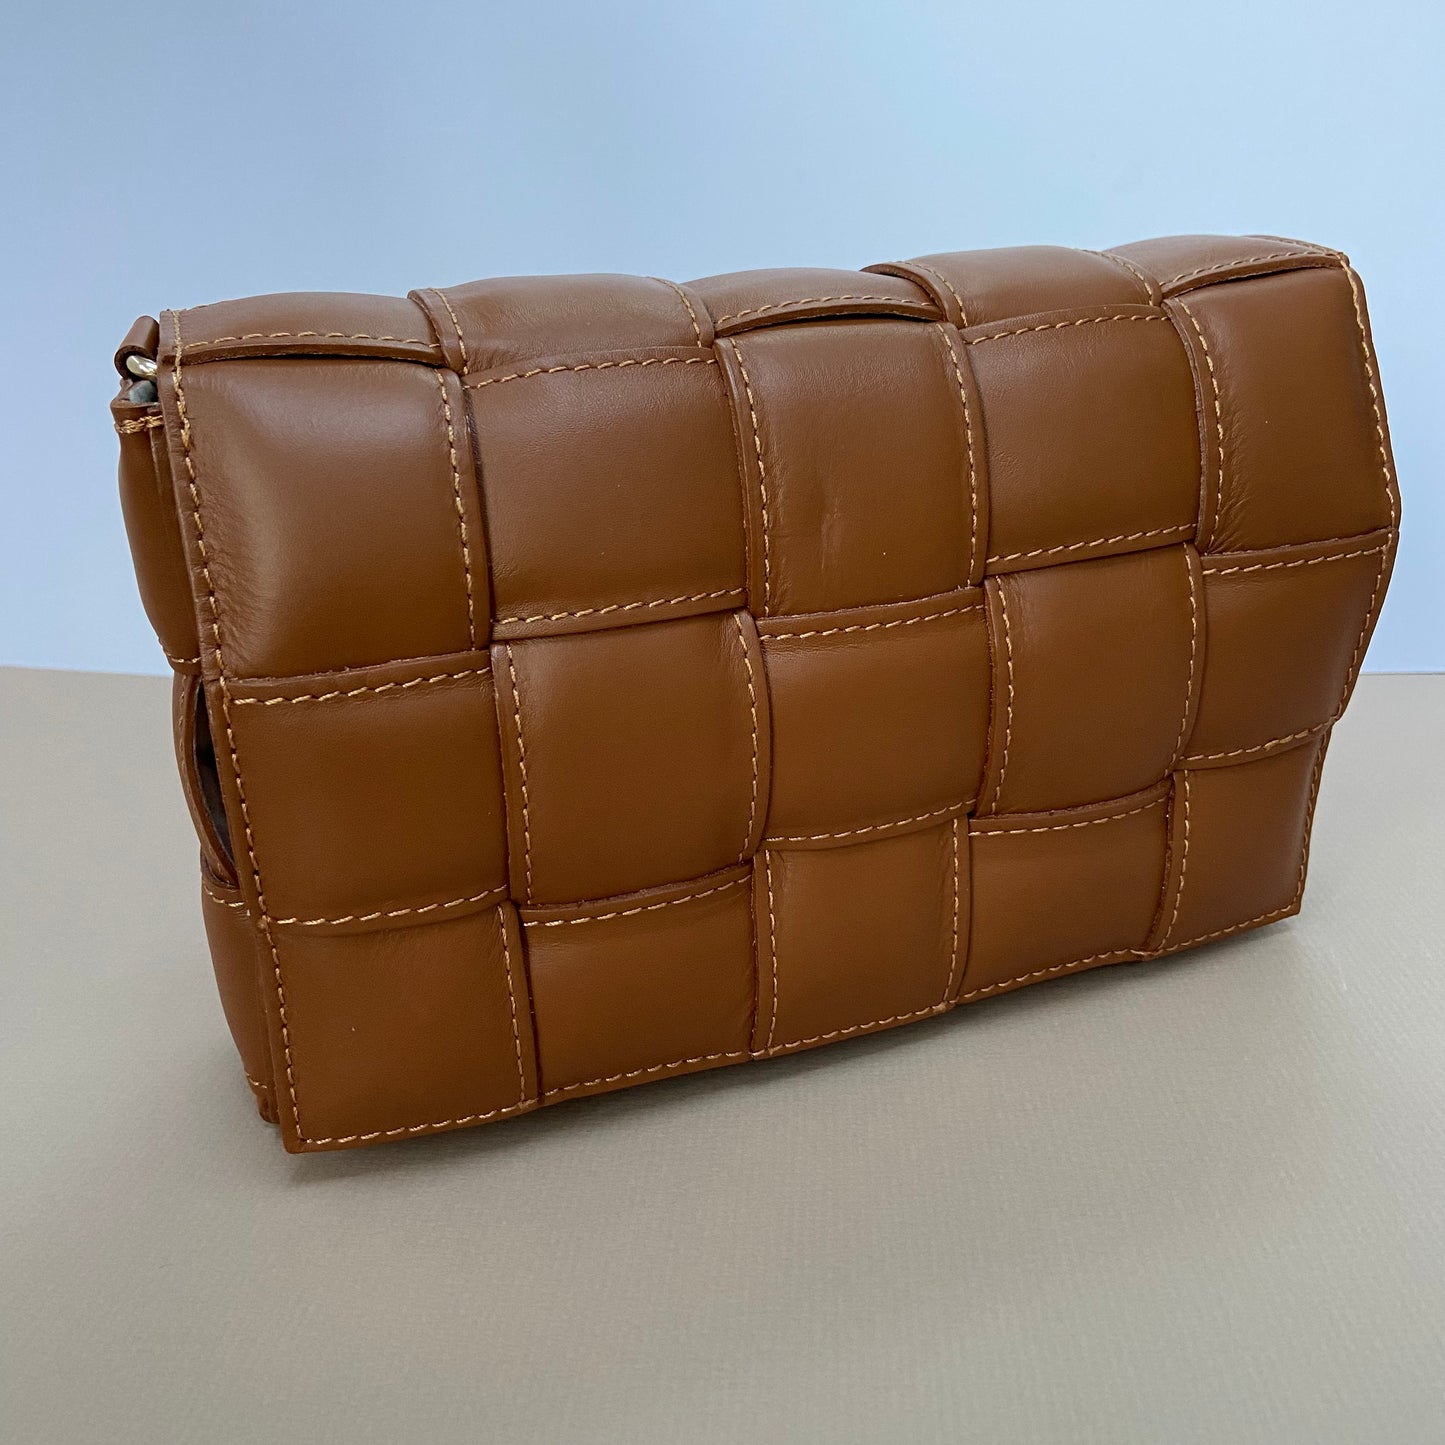 The Woven Padded Leather Bag